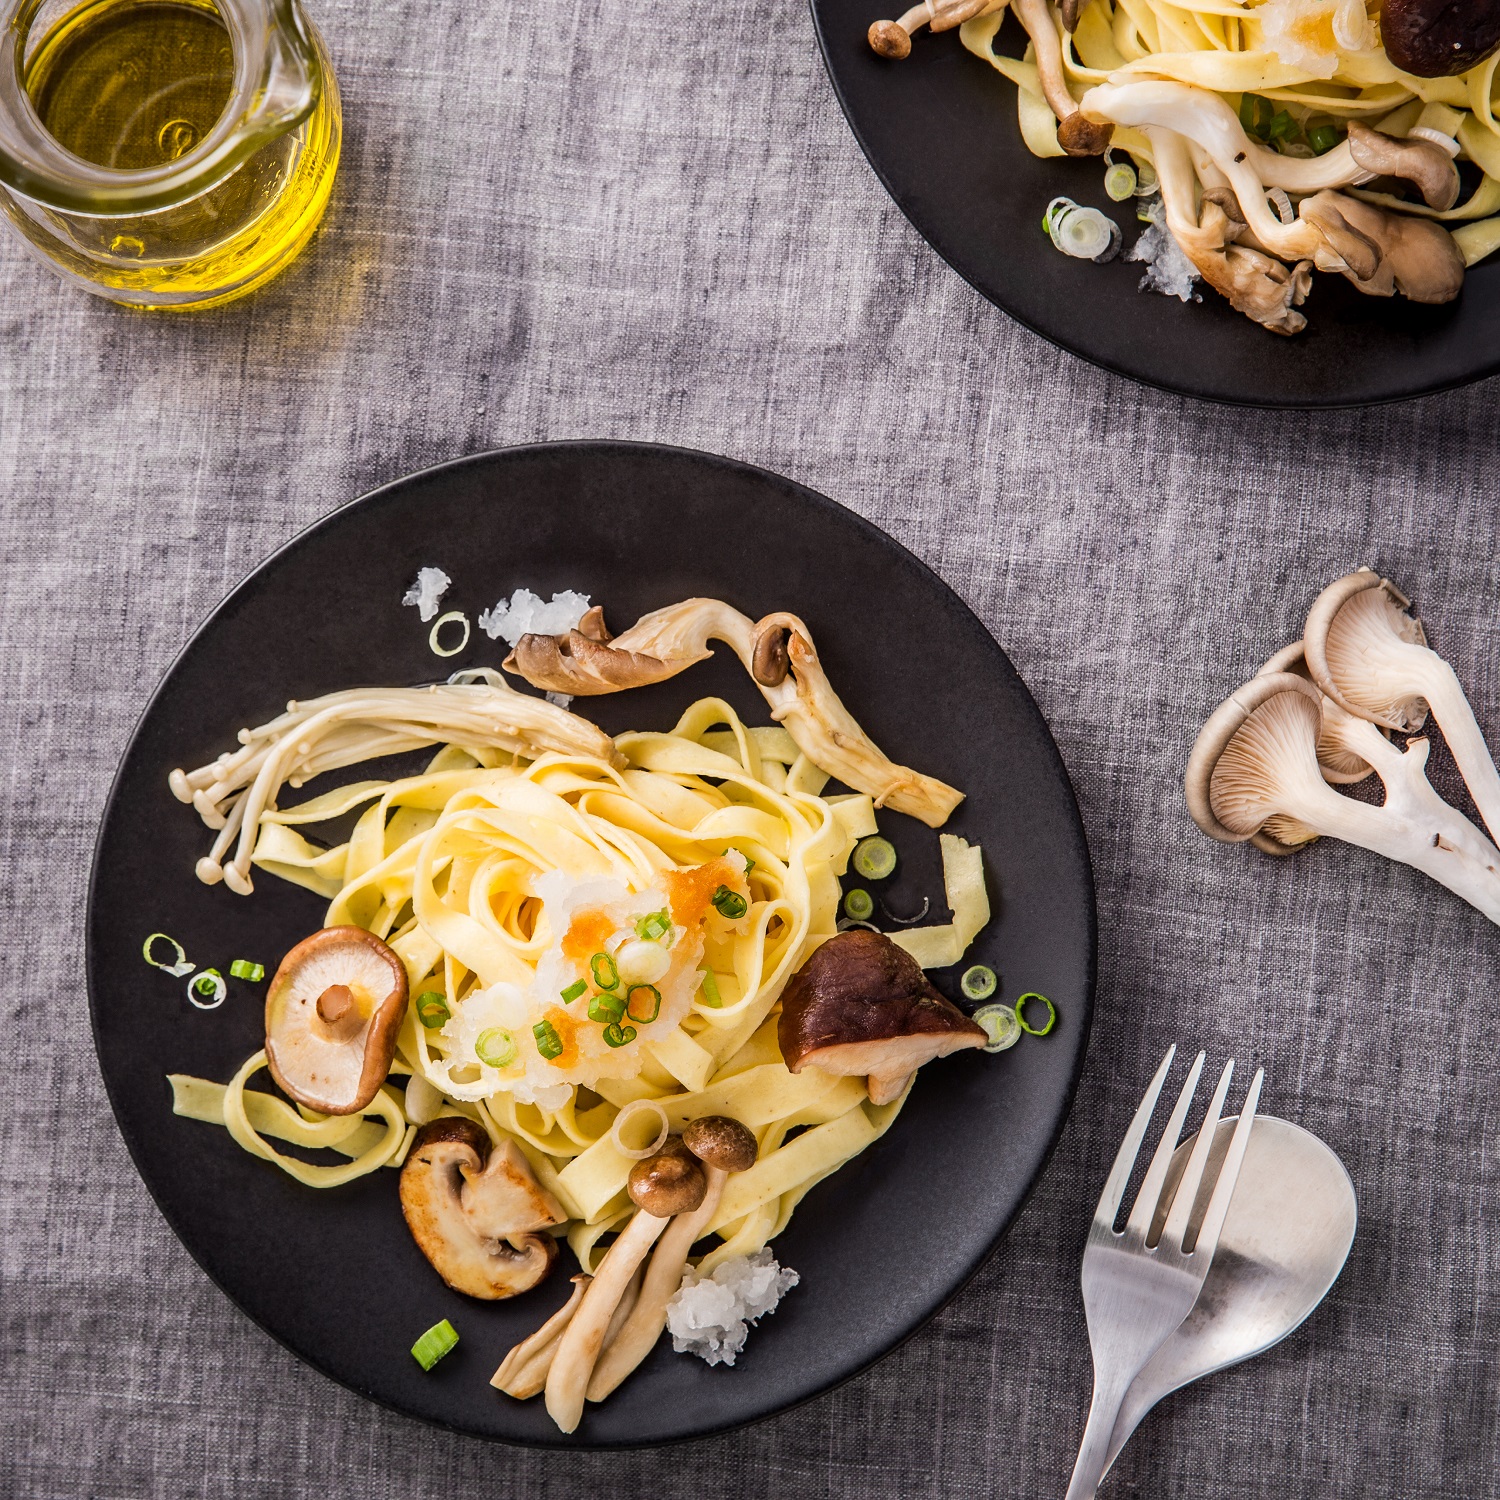 Duso’s Fettuccine with a Medley of Mushrooms